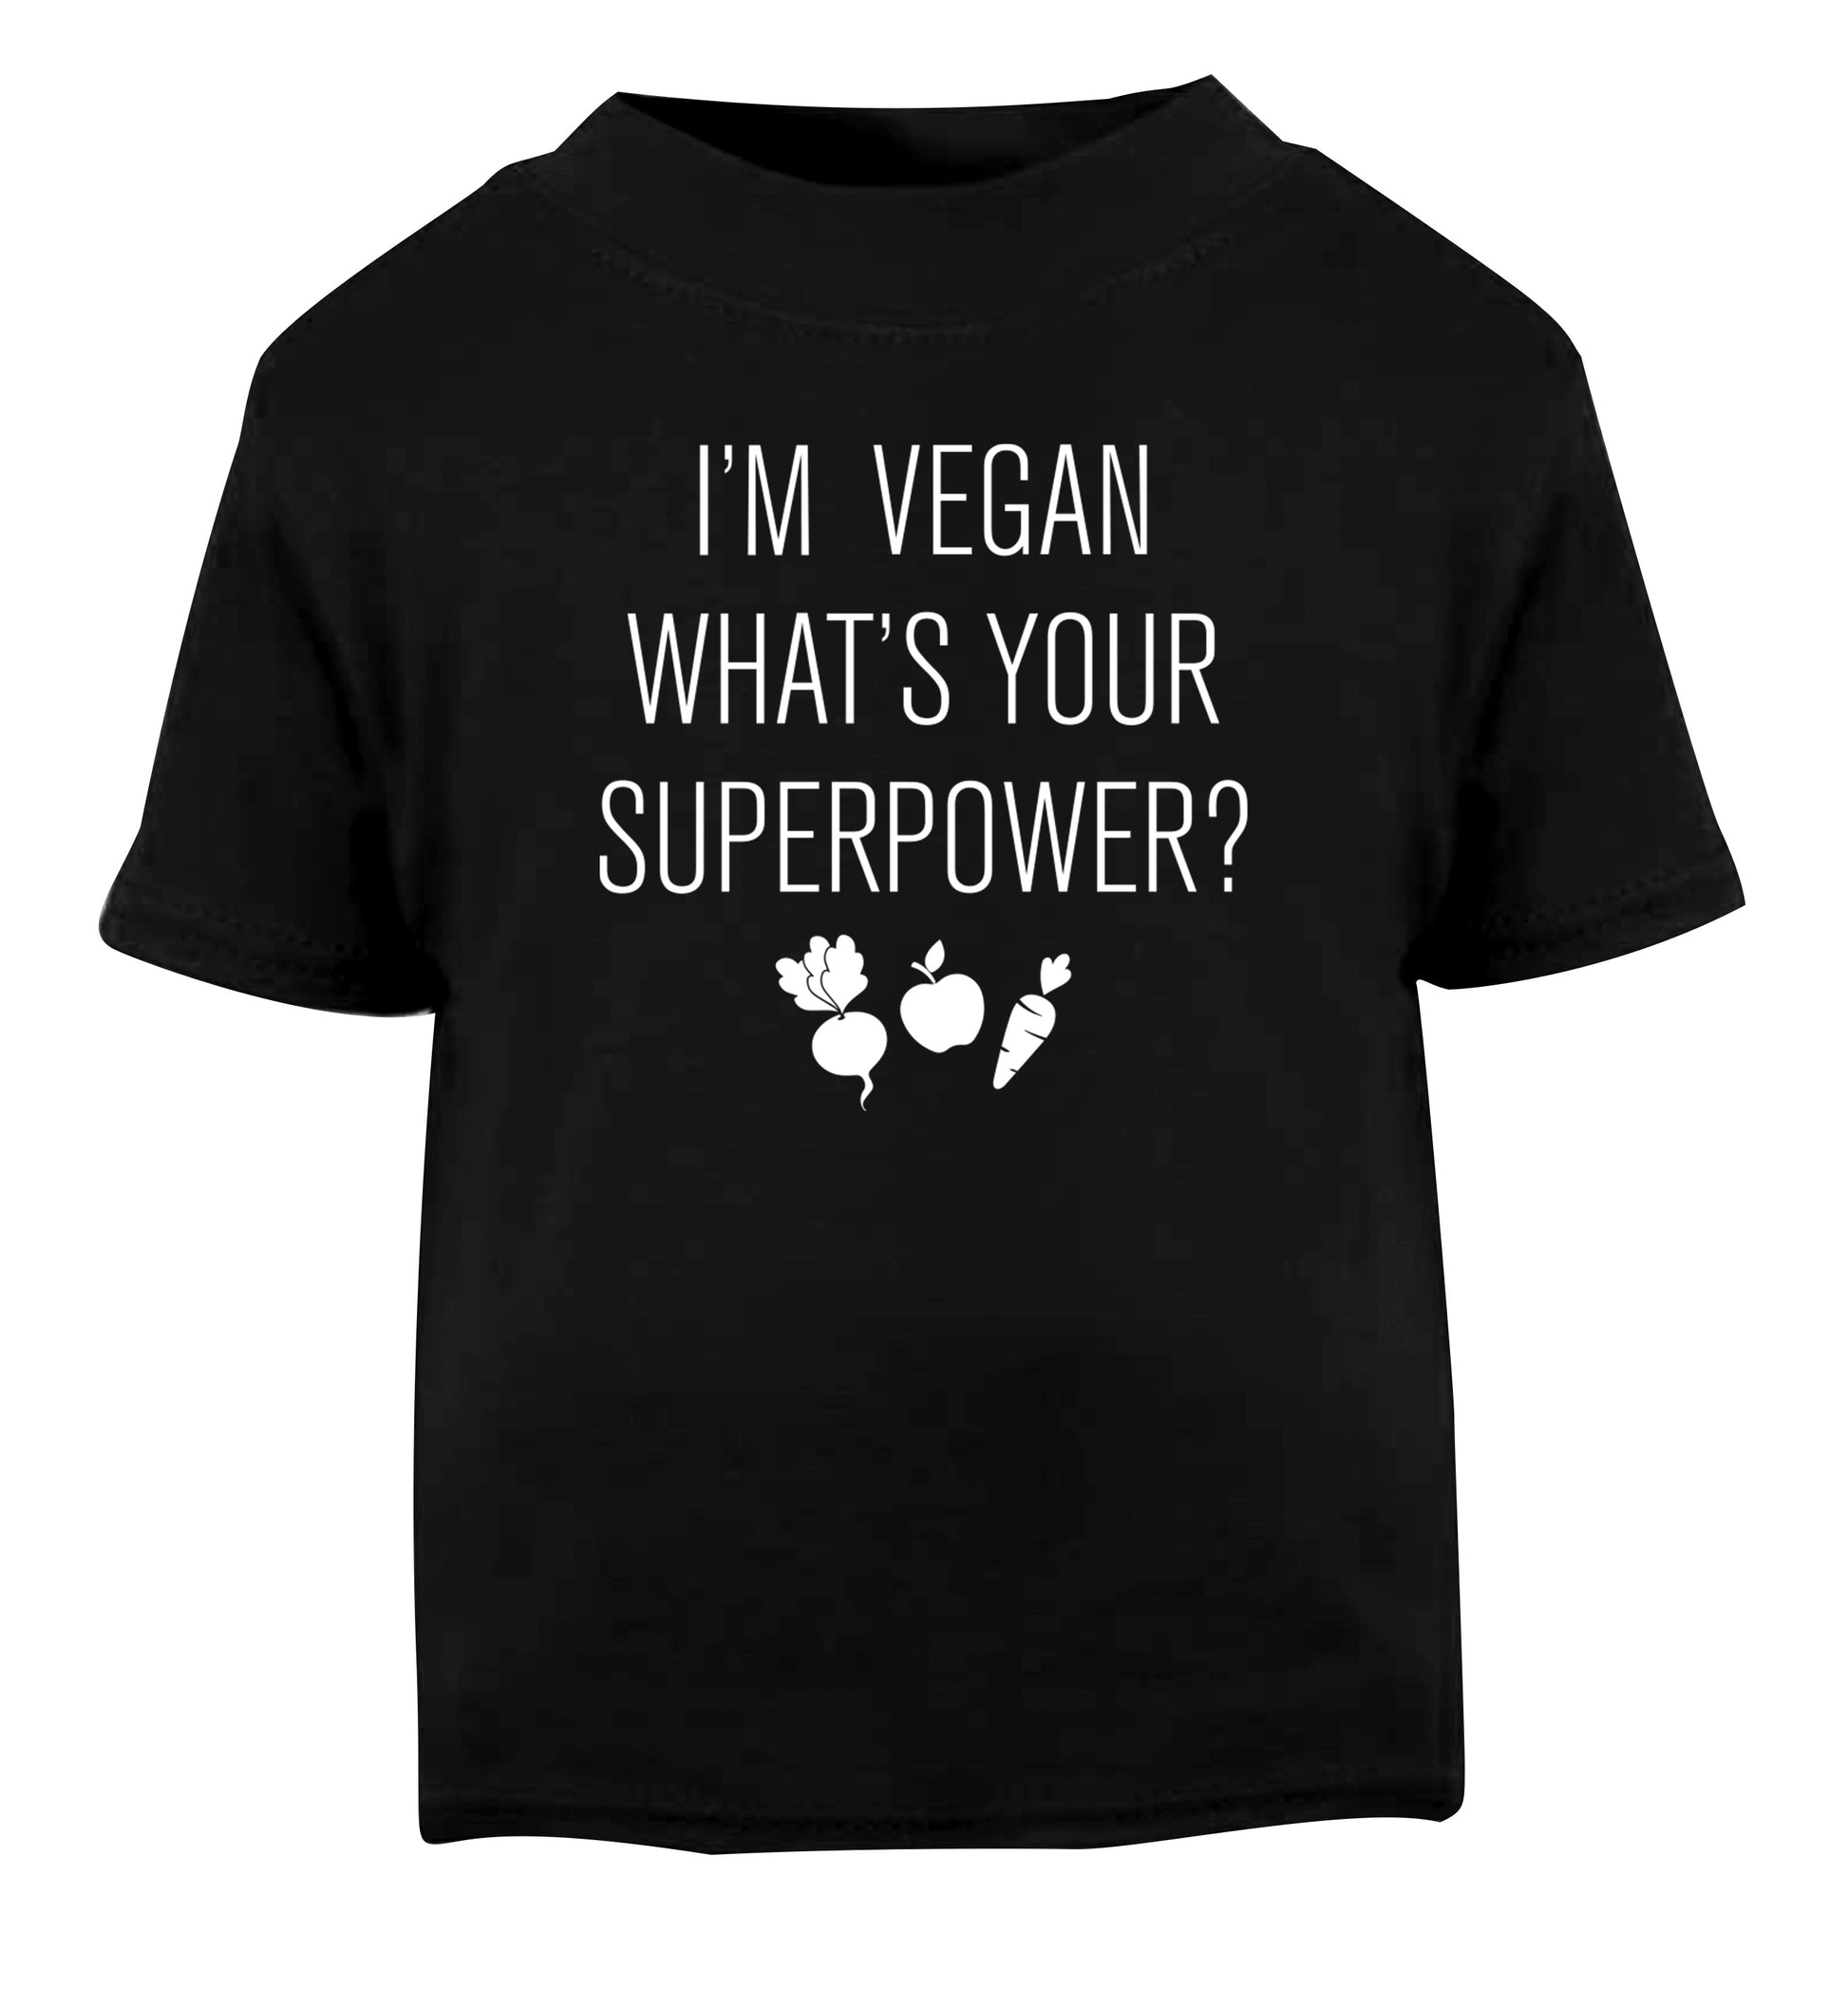 I'm Vegan What's Your Superpower? Black Baby Toddler Tshirt 2 years